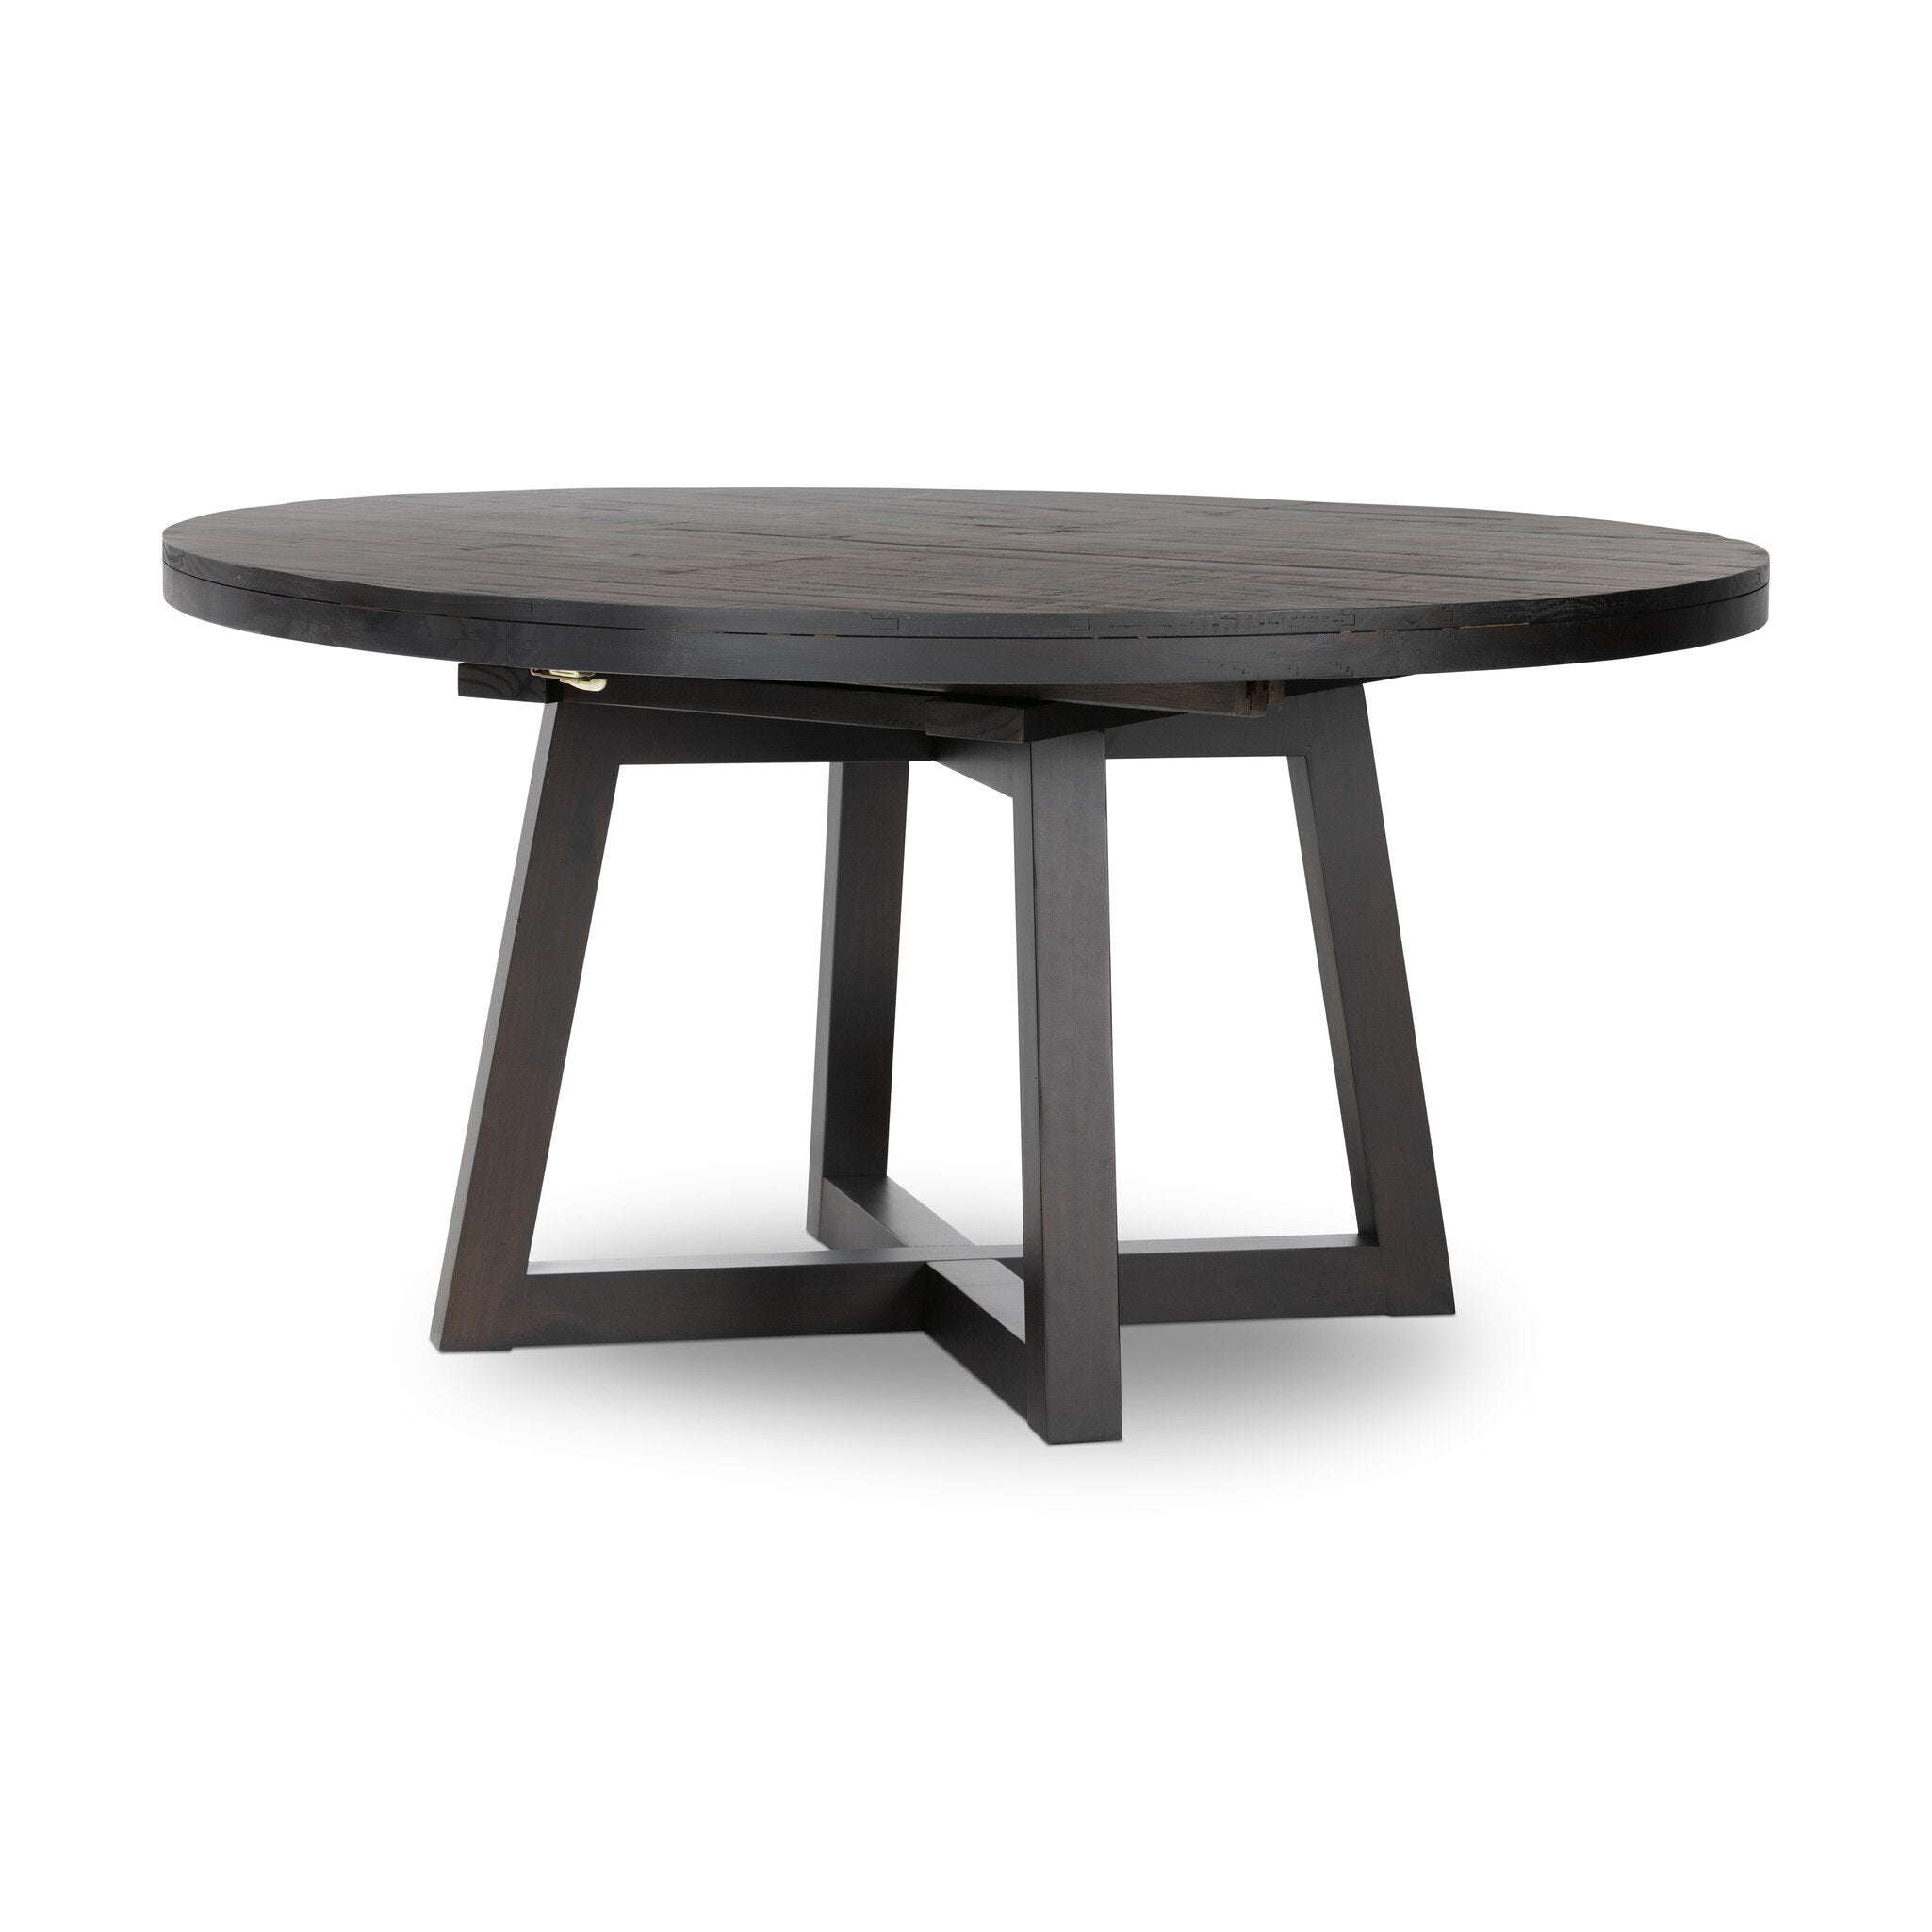 Eberwin Round Ext Dining Table - Dark Carbon